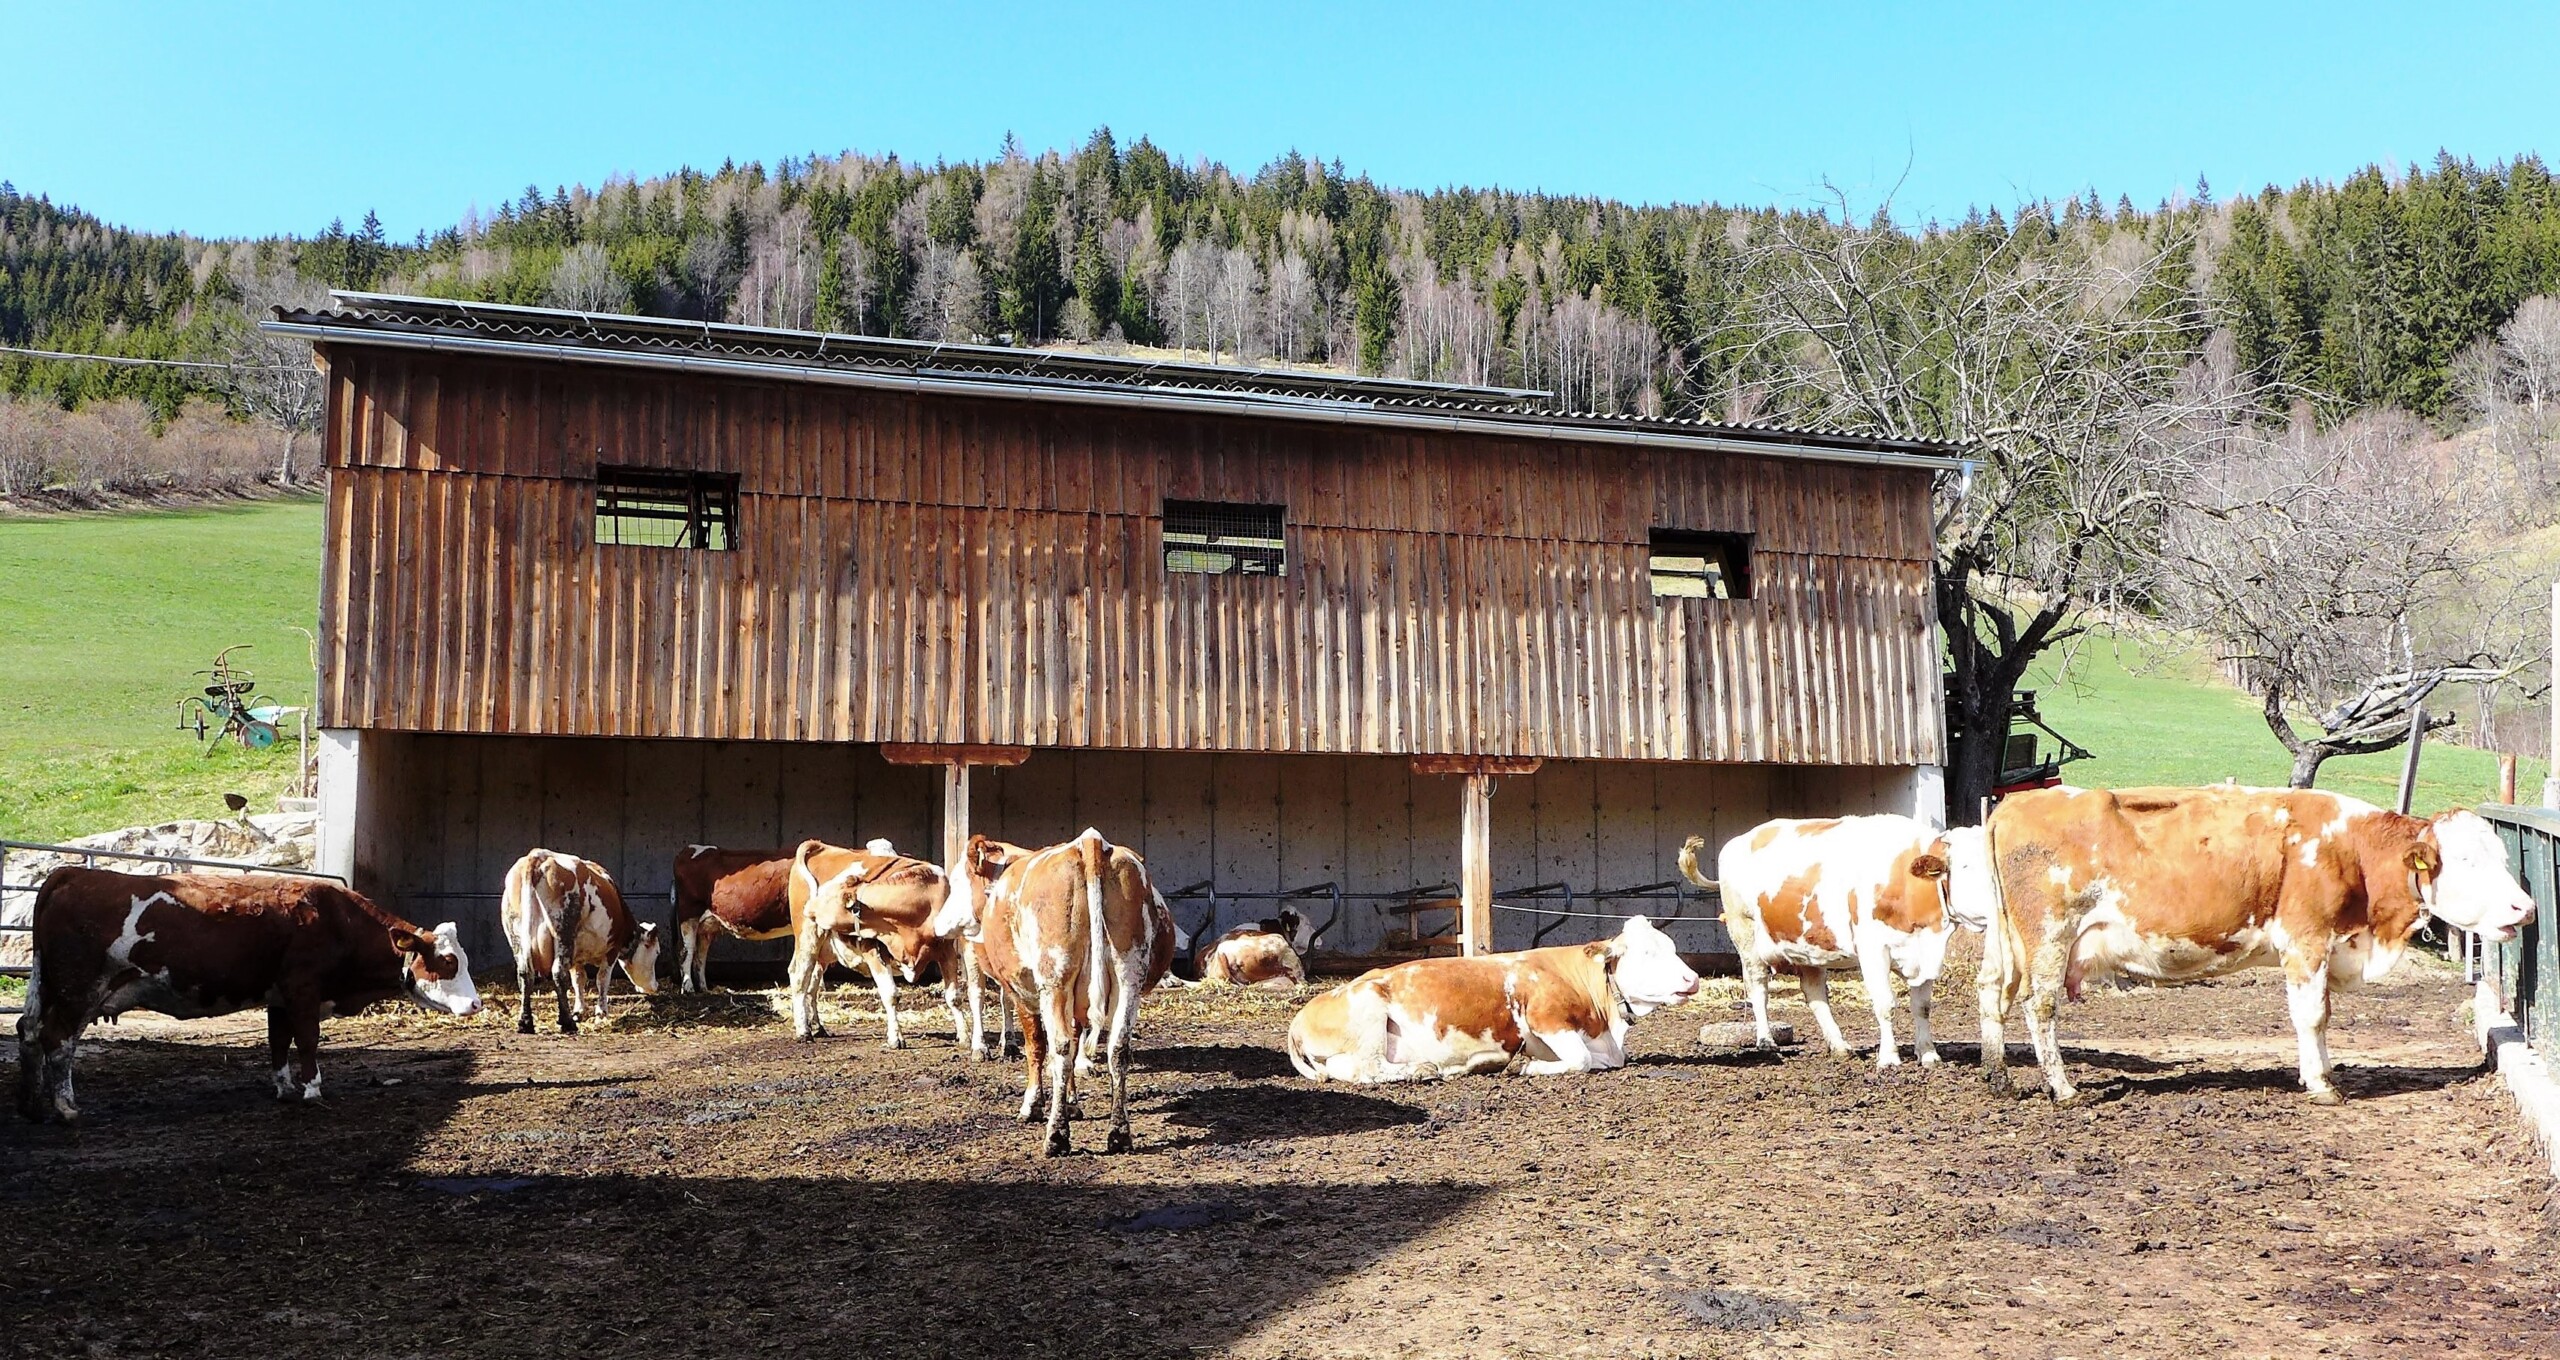 Furnished run for cows